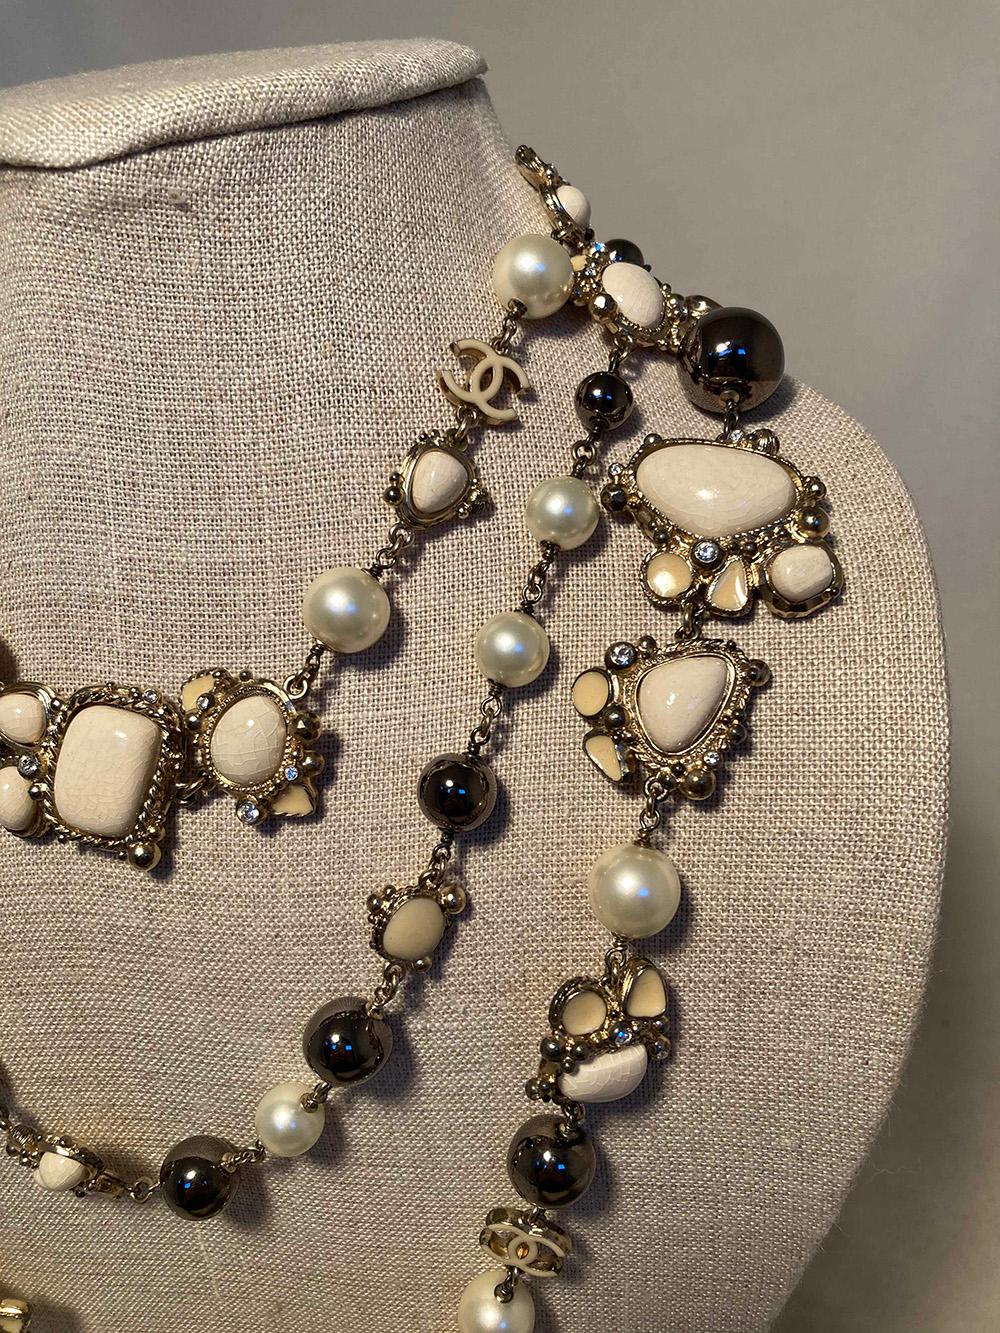 Chanel Vintage Enamel and Pearl Necklace in very good condition. pearl and gunmetal beads on silver chain with enamel stone accents and crystal details. Can be worn doubled or tripled around neck. No missing stones or scratches on beads. Very light